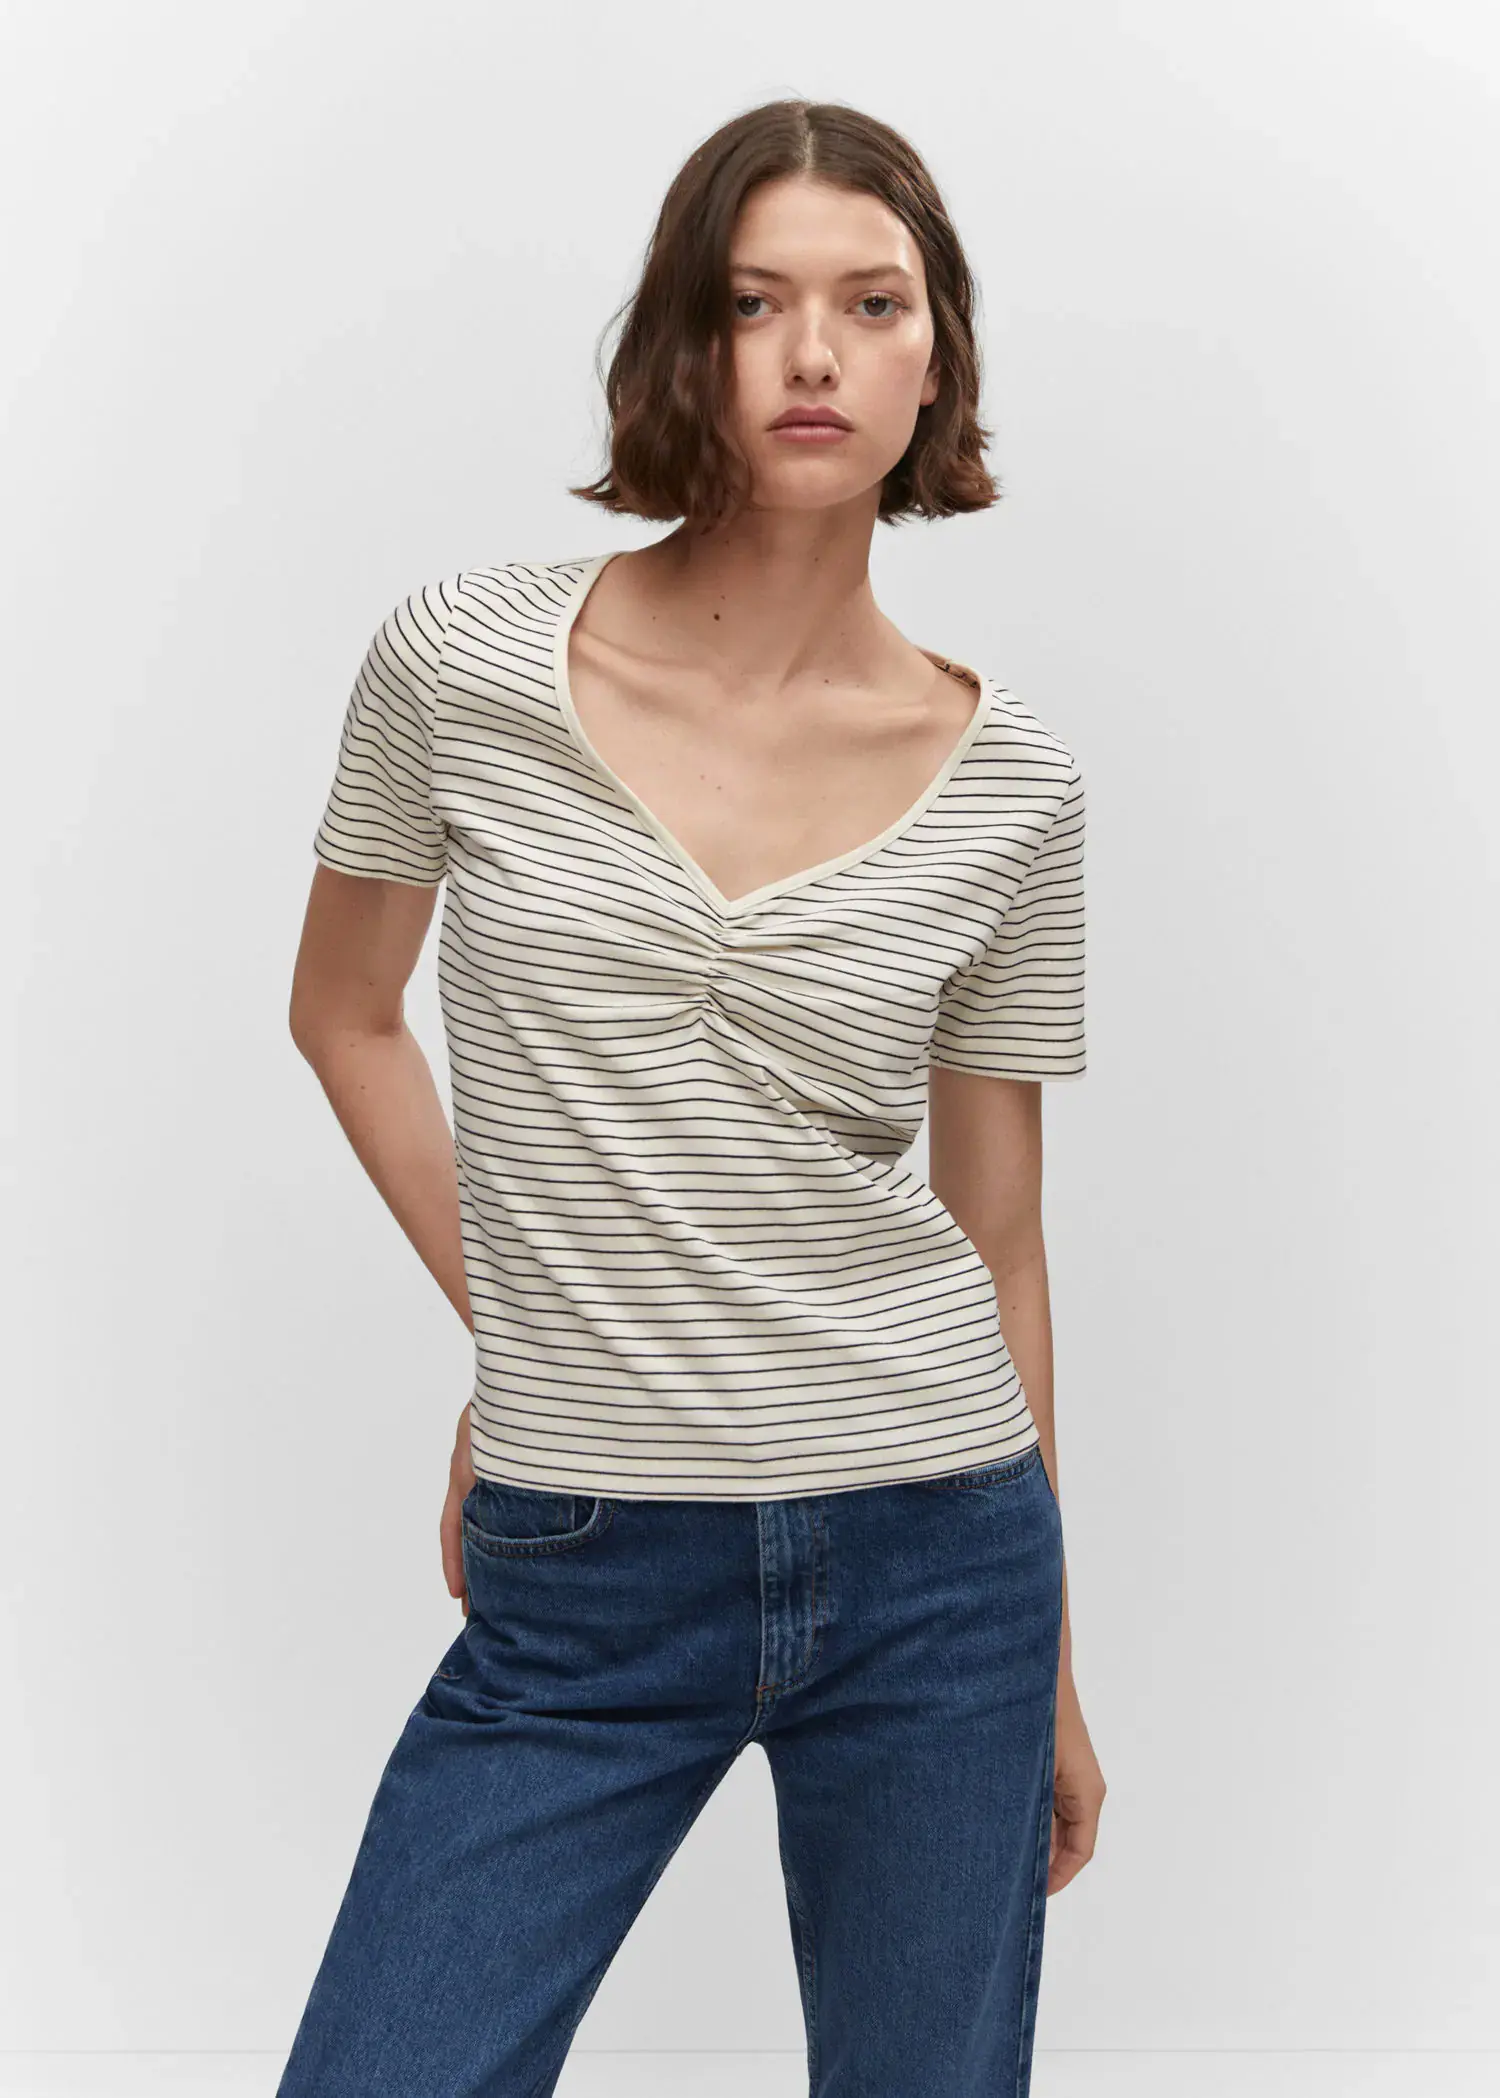 Mango Cotton t-shirt with pucker detail. a woman wearing a white and black striped t-shirt. 